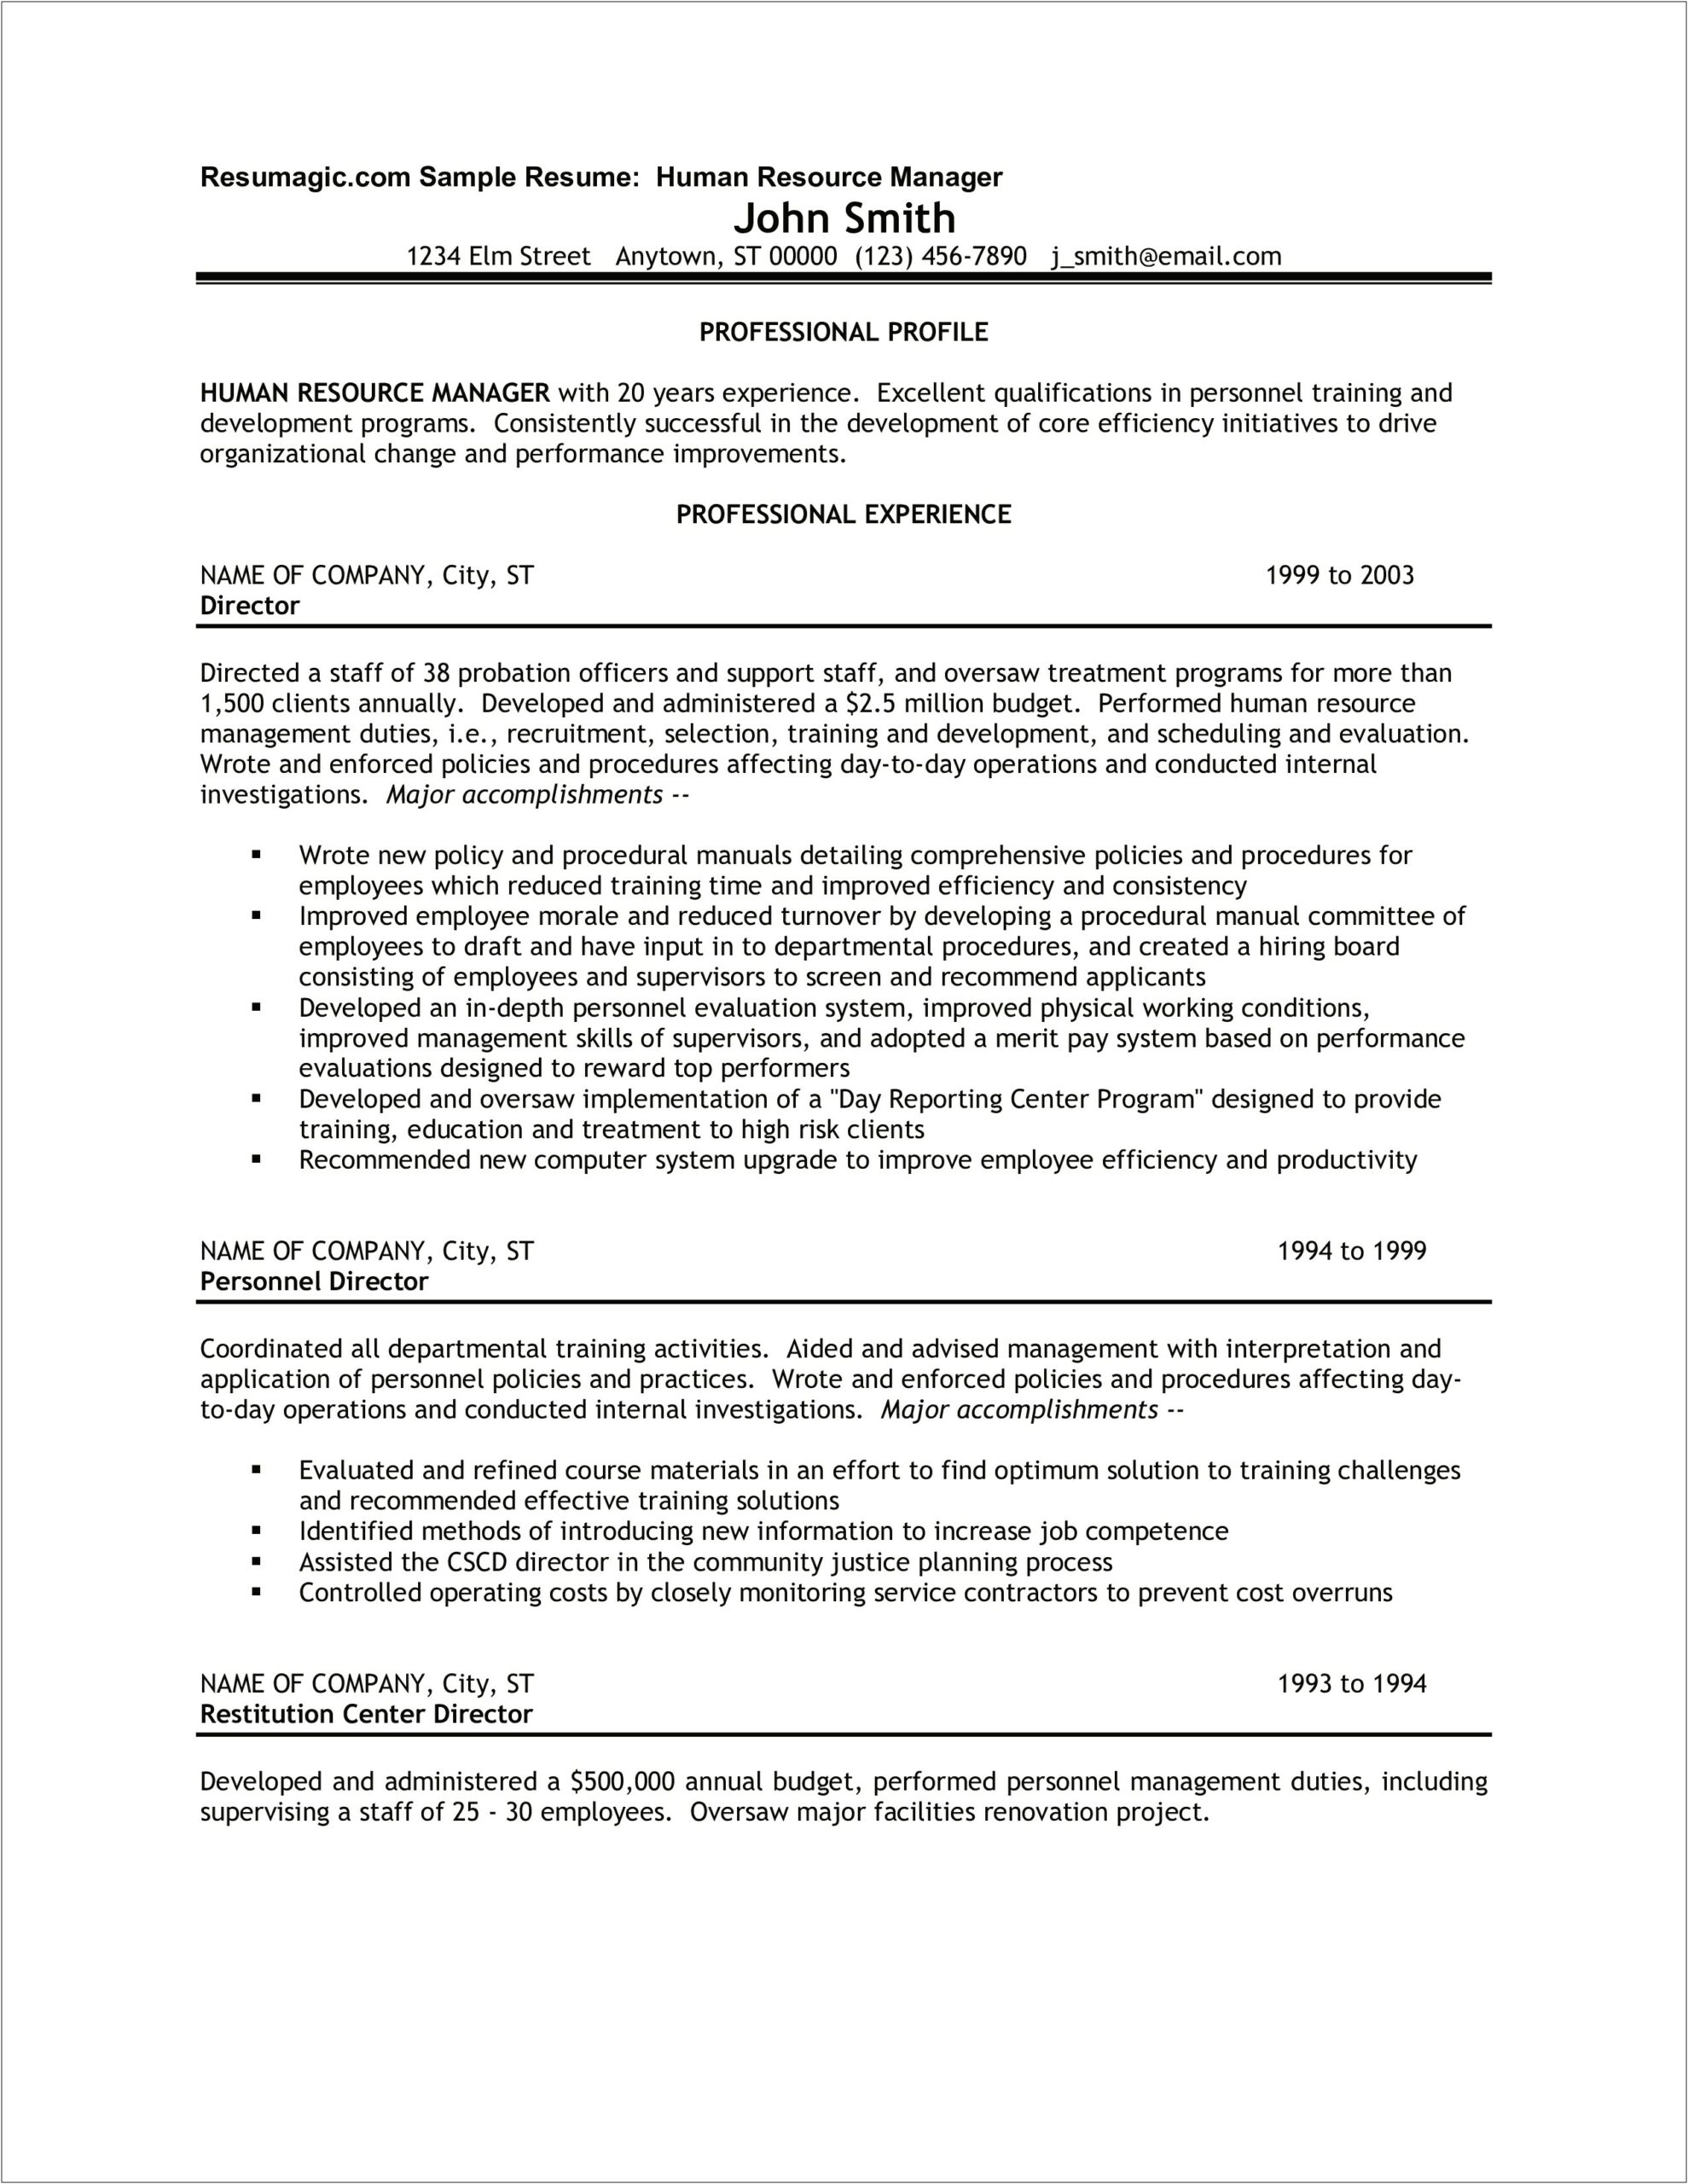 Human Resources Manager Resume Doc